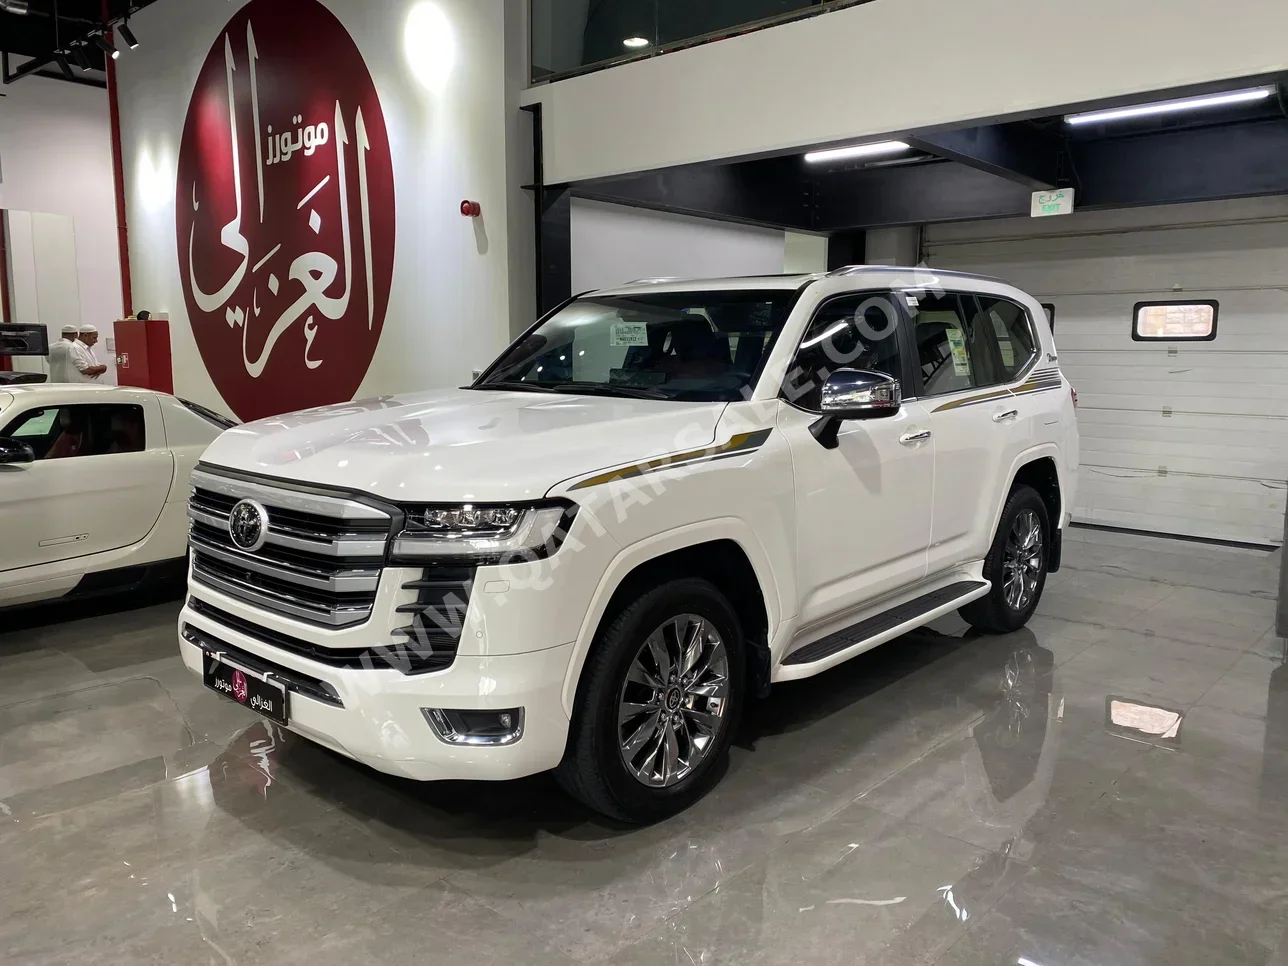 Toyota  Land Cruiser  VXR Twin Turbo  2022  Automatic  17,000 Km  6 Cylinder  Four Wheel Drive (4WD)  SUV  White  With Warranty